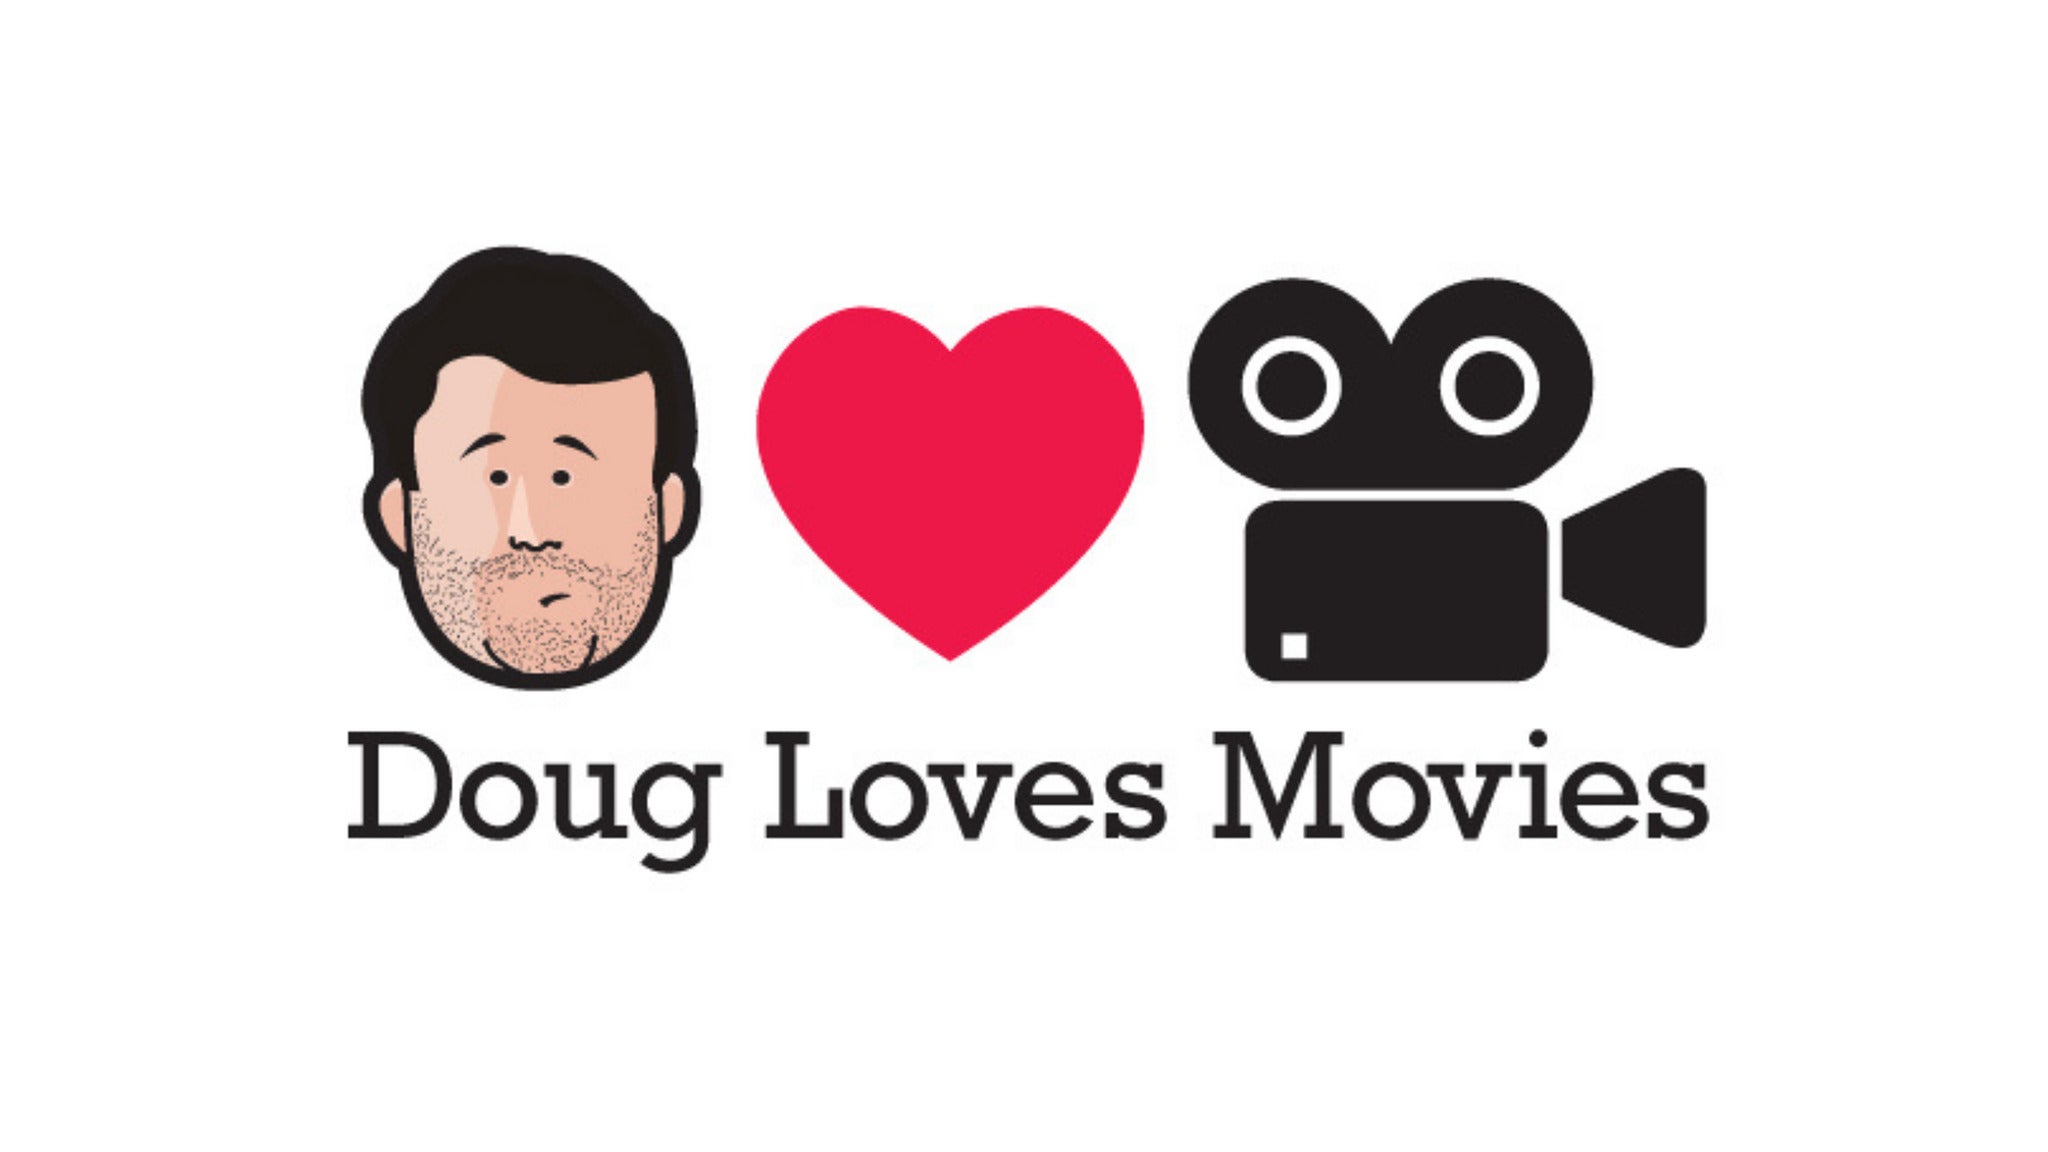 Doug Loves Movies: 12 Guests of Xmas in New York promo photo for Live Nation presale offer code